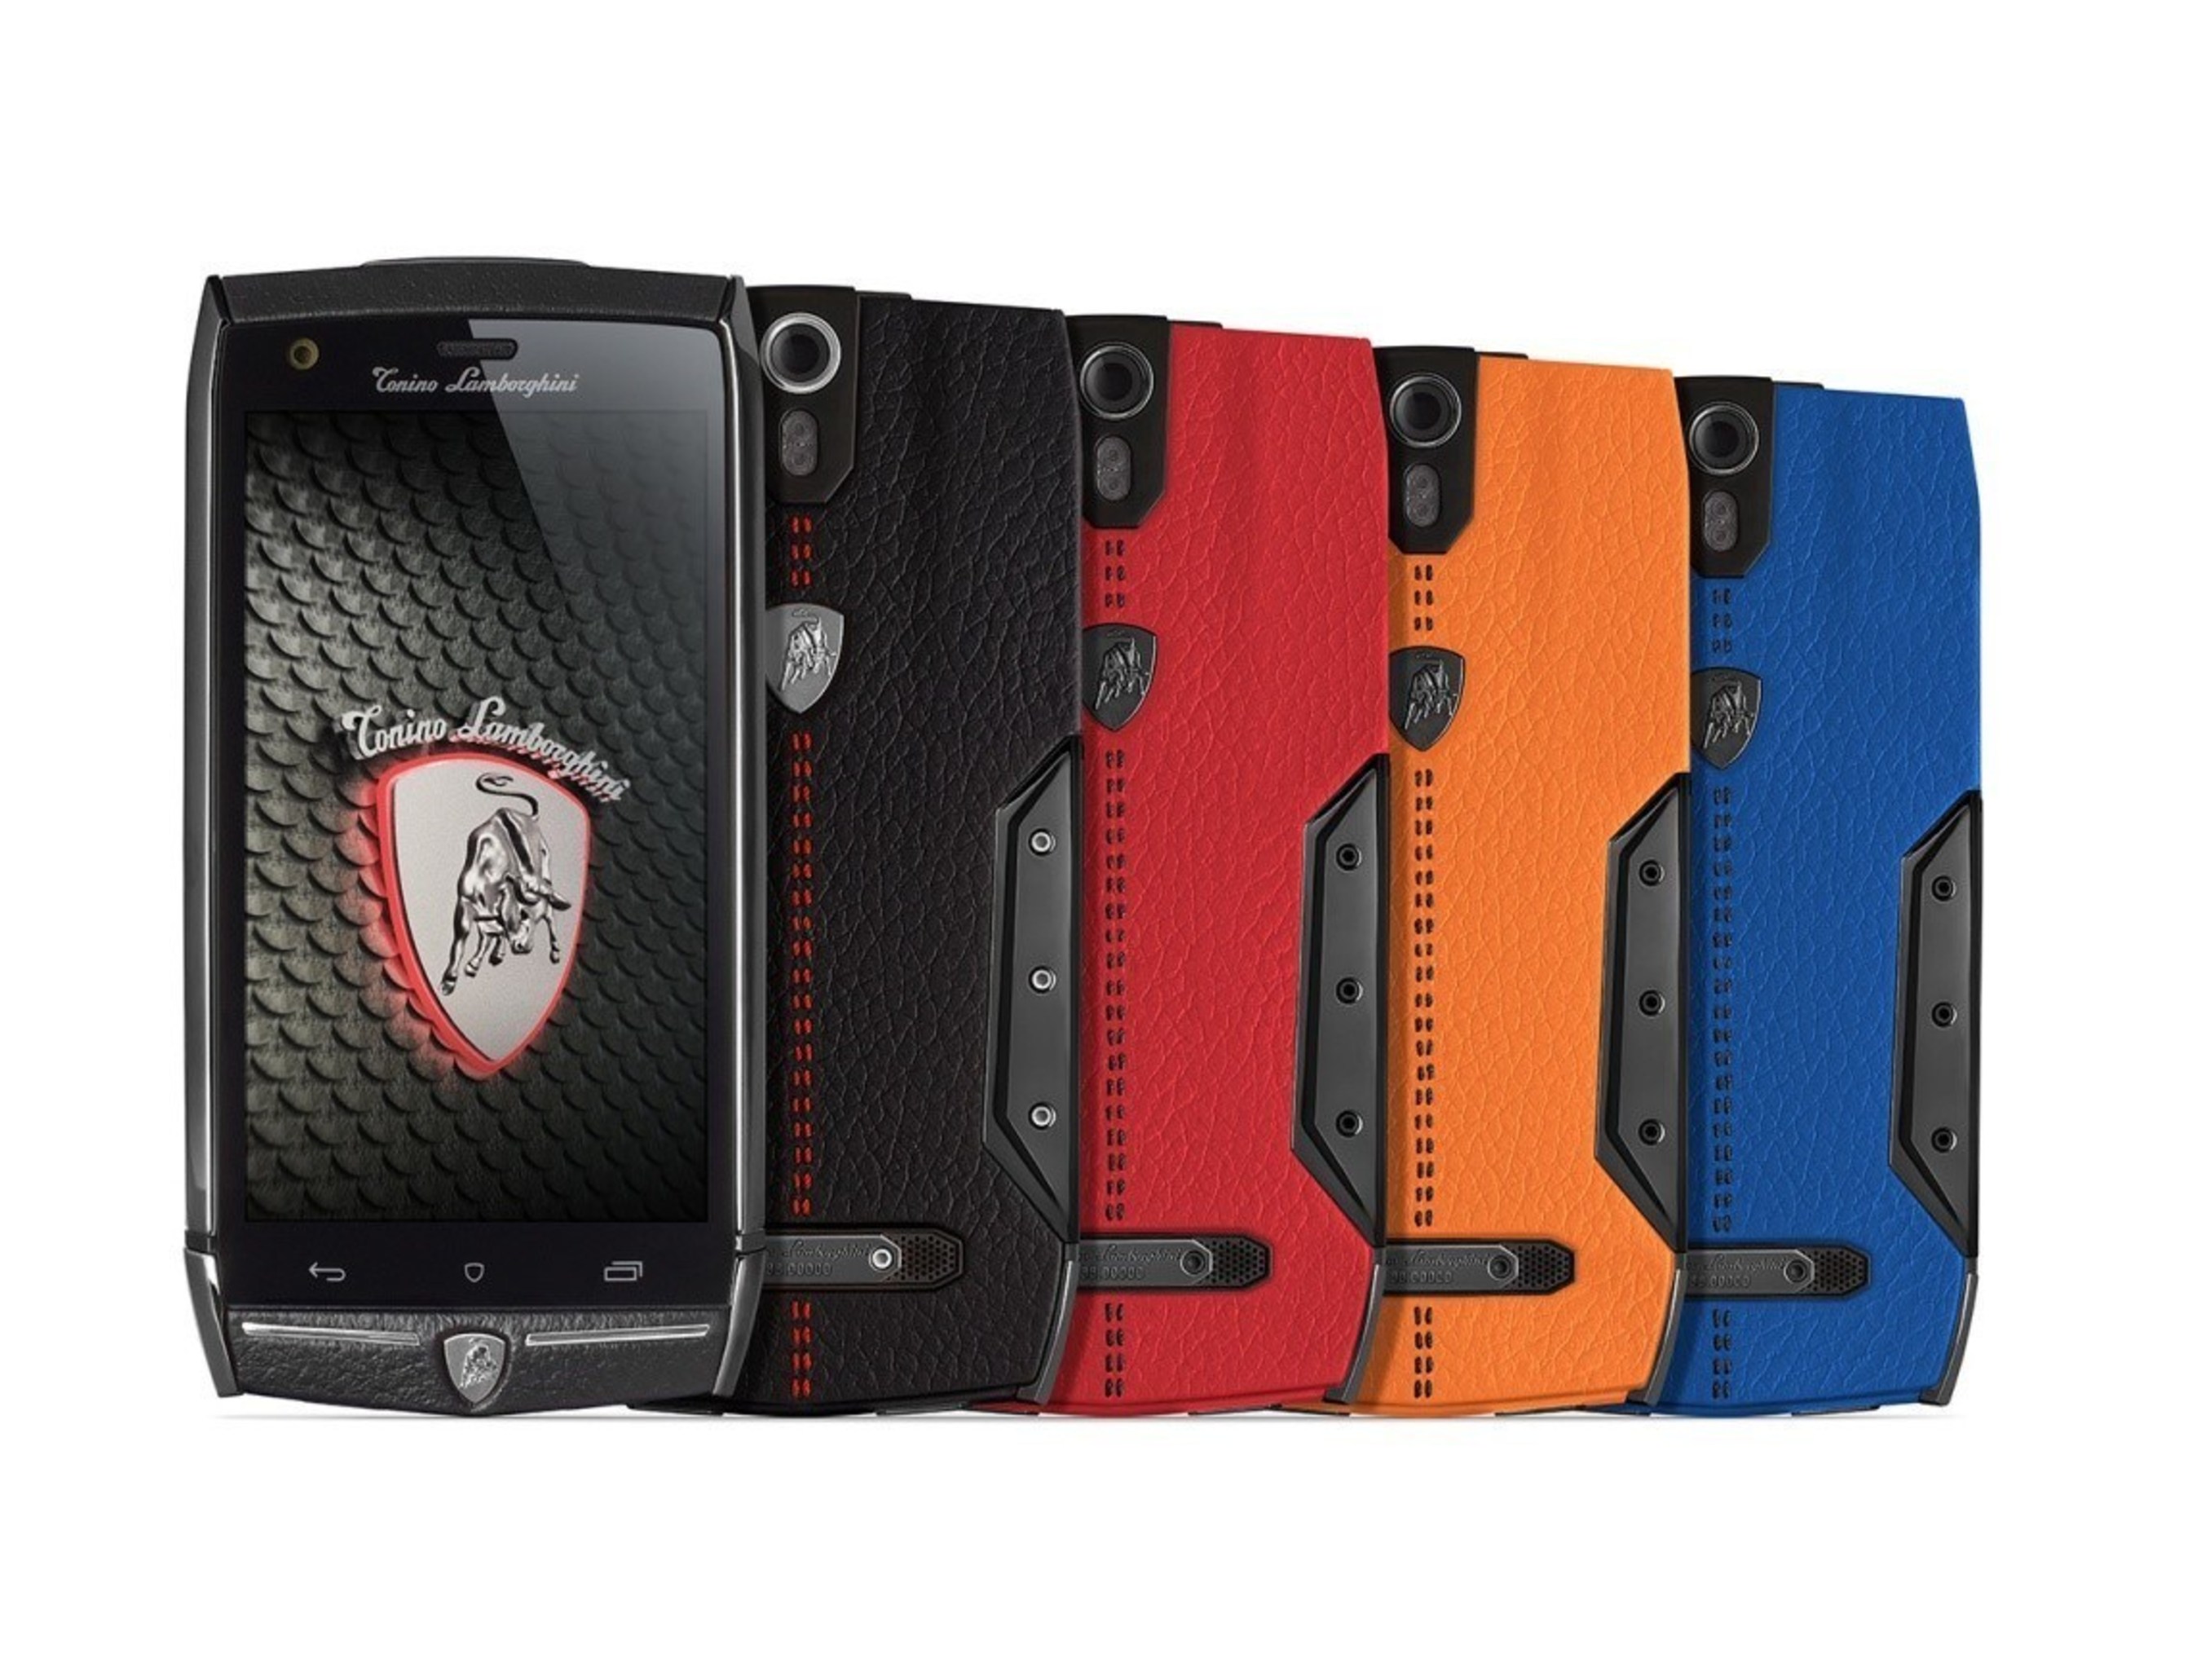 Tonino Lamborghini Mobile today unveiled its latest high-end Android smartphone, the 88 Tauri, at CES 2015